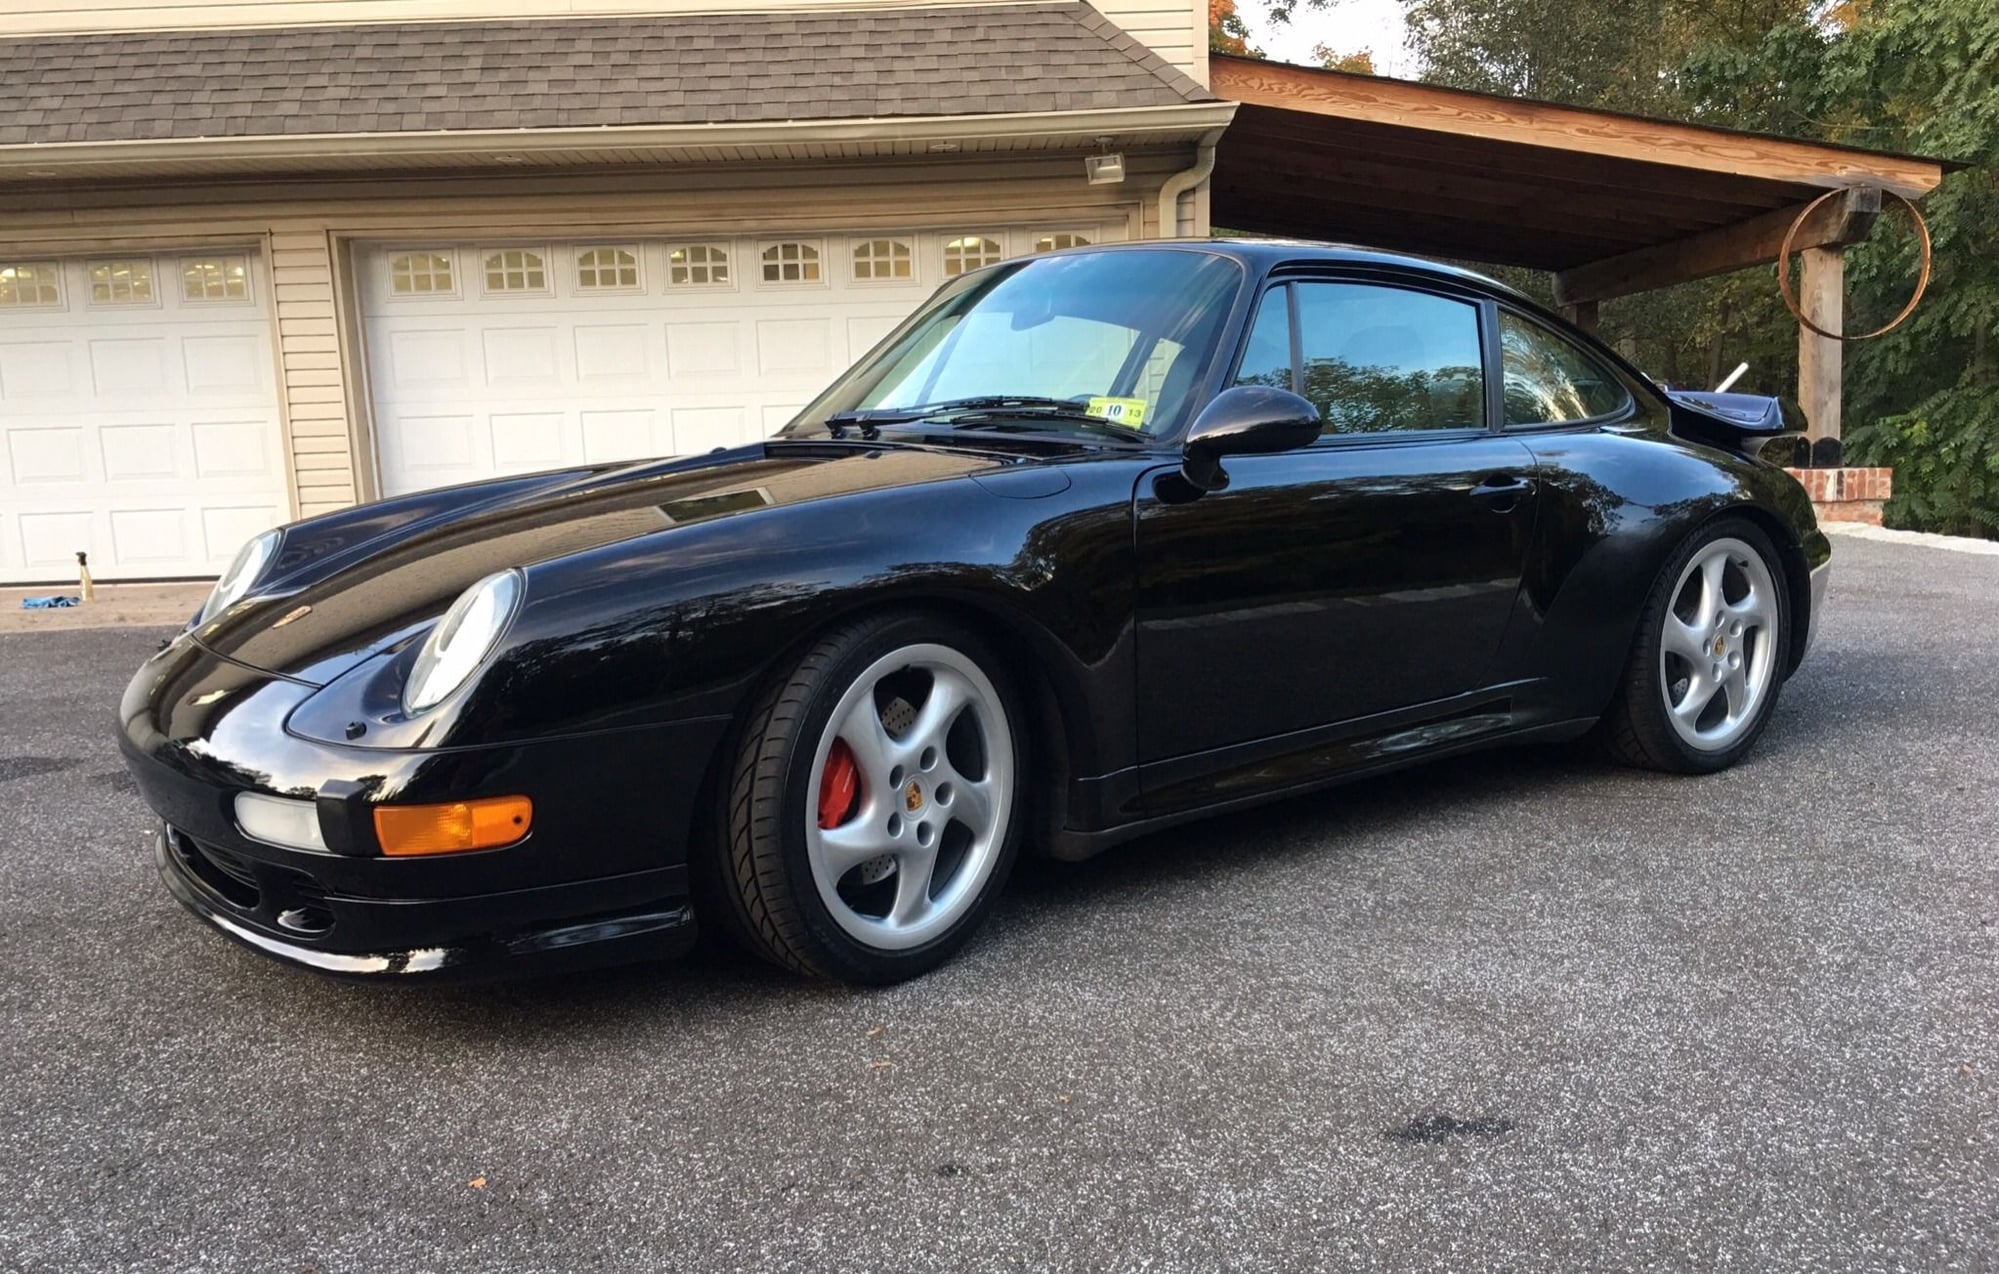 1996 Porsche 911 - 22k miles, excellent condition 993 TT - Used - VIN WP0AC2997TS37543 - 6 cyl - 2WD - Manual - Coupe - Black - San Francisco, CA 94111, United States